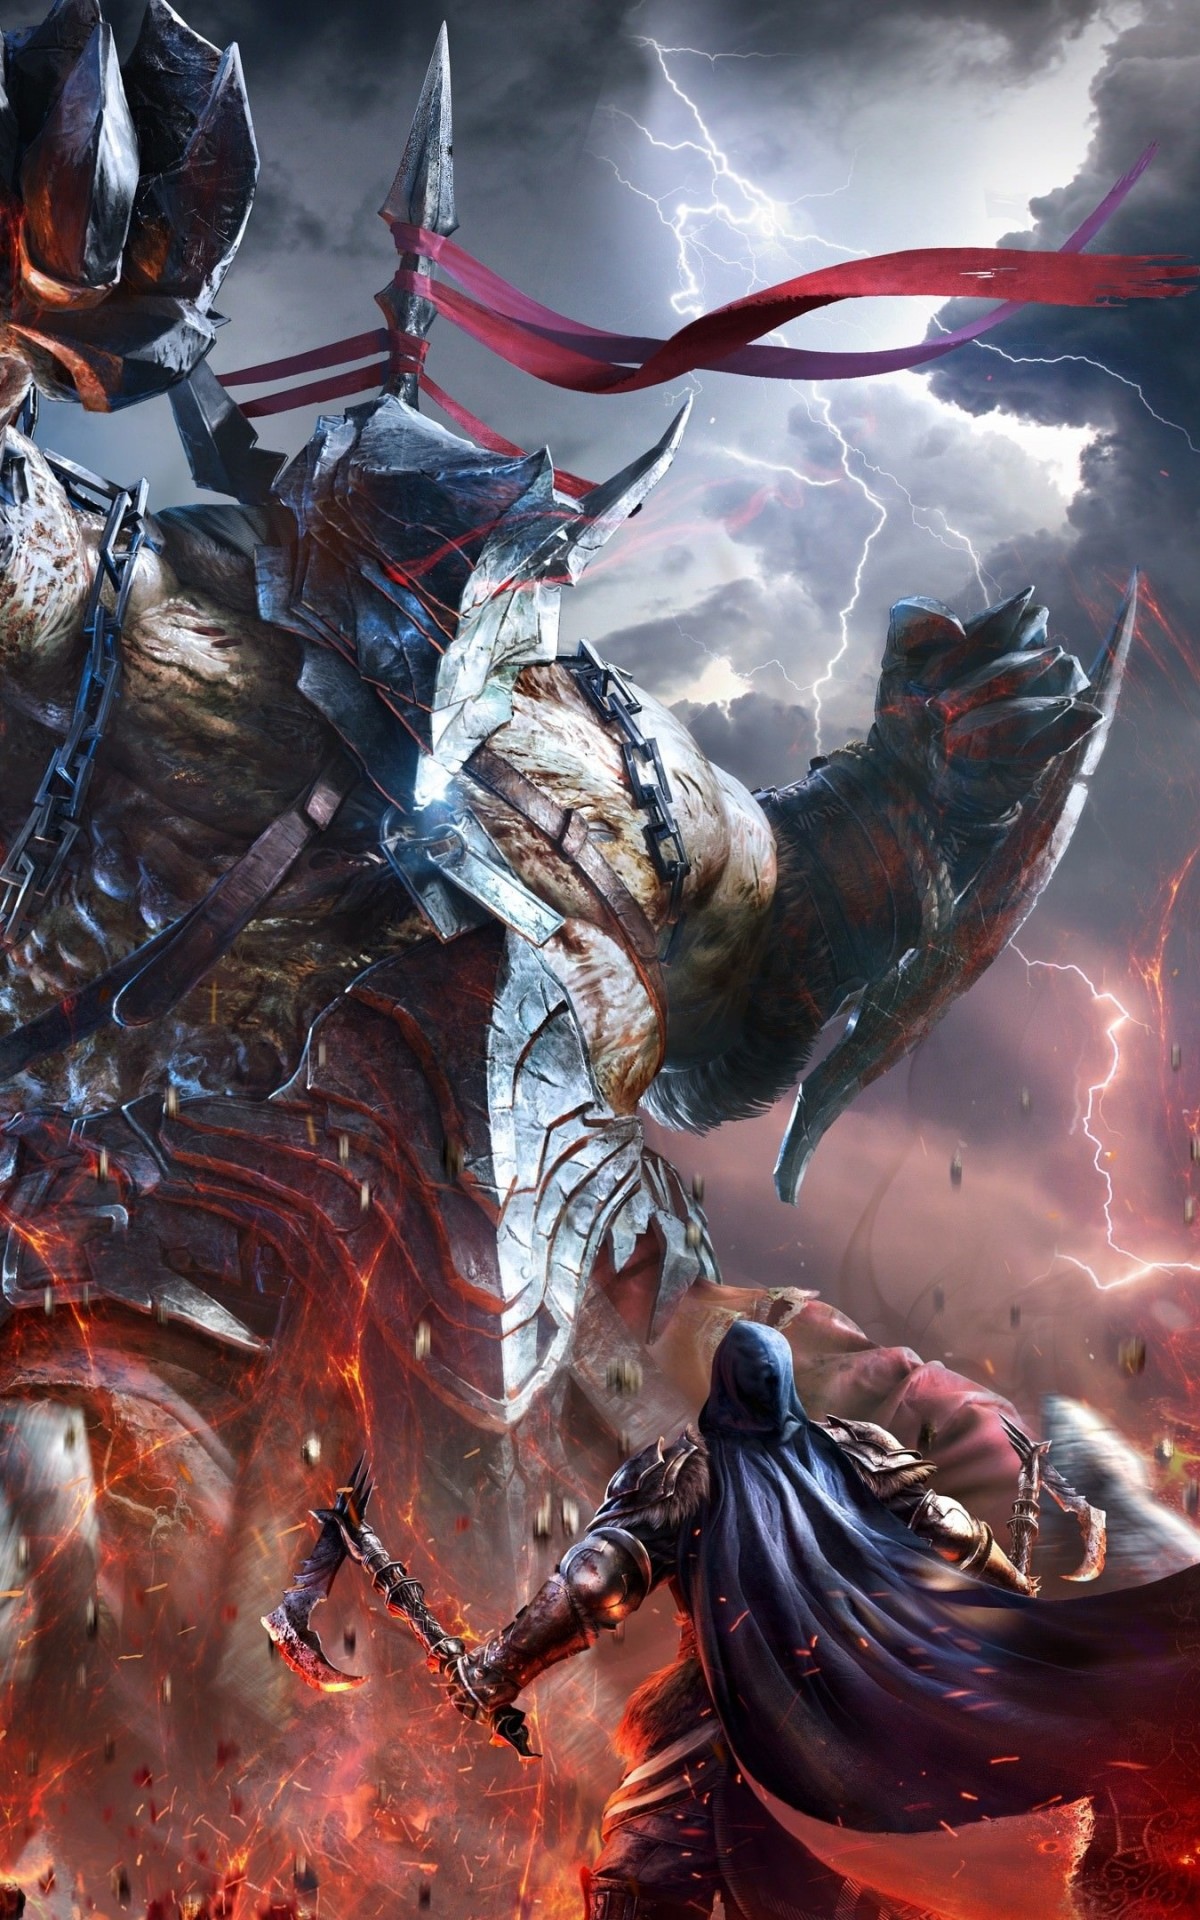 Lords of The Fallen Wallpaper for Amazon Kindle Fire HDX